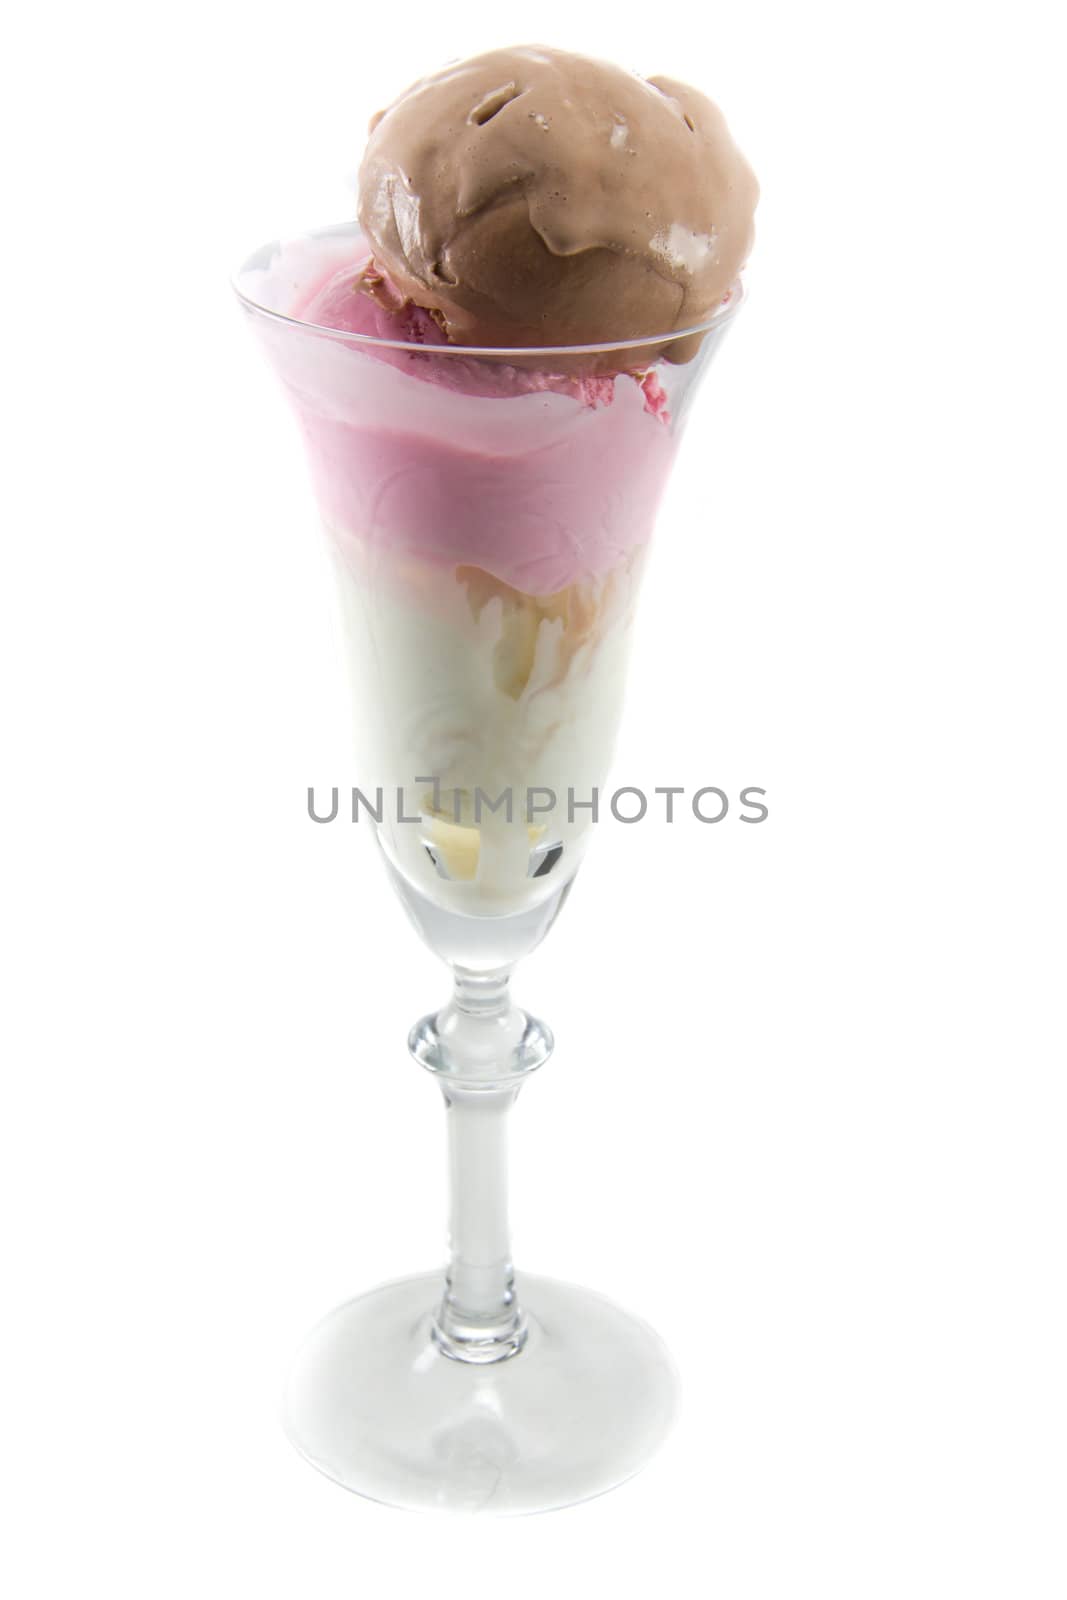 Picture of three different sort of icecream flavours in a wine glass